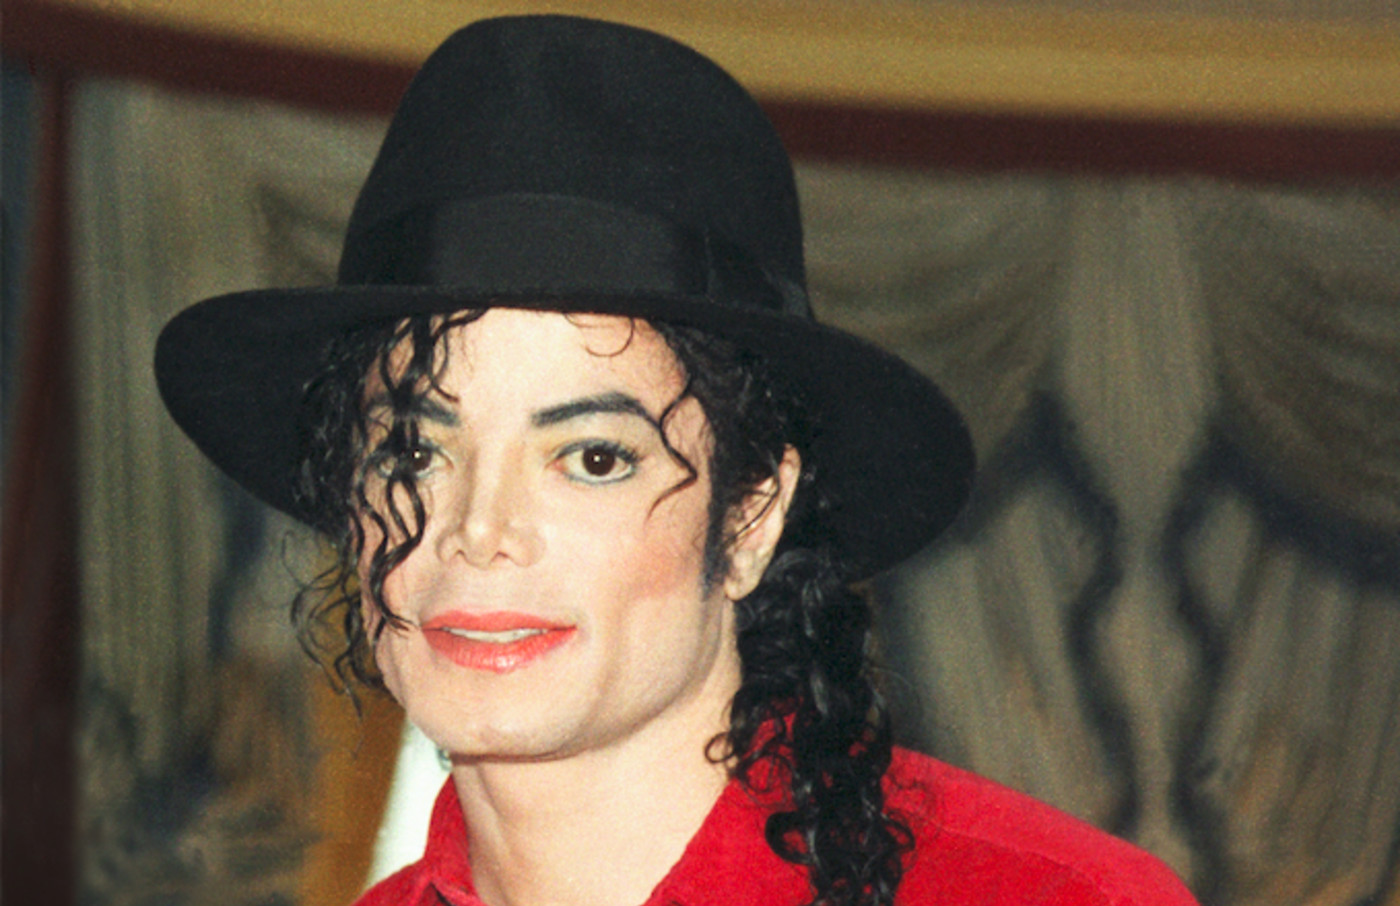 Michael Jackson's Accusers Win Appeal, Can Now Sue for Alleged Sexual Abuse | Complex